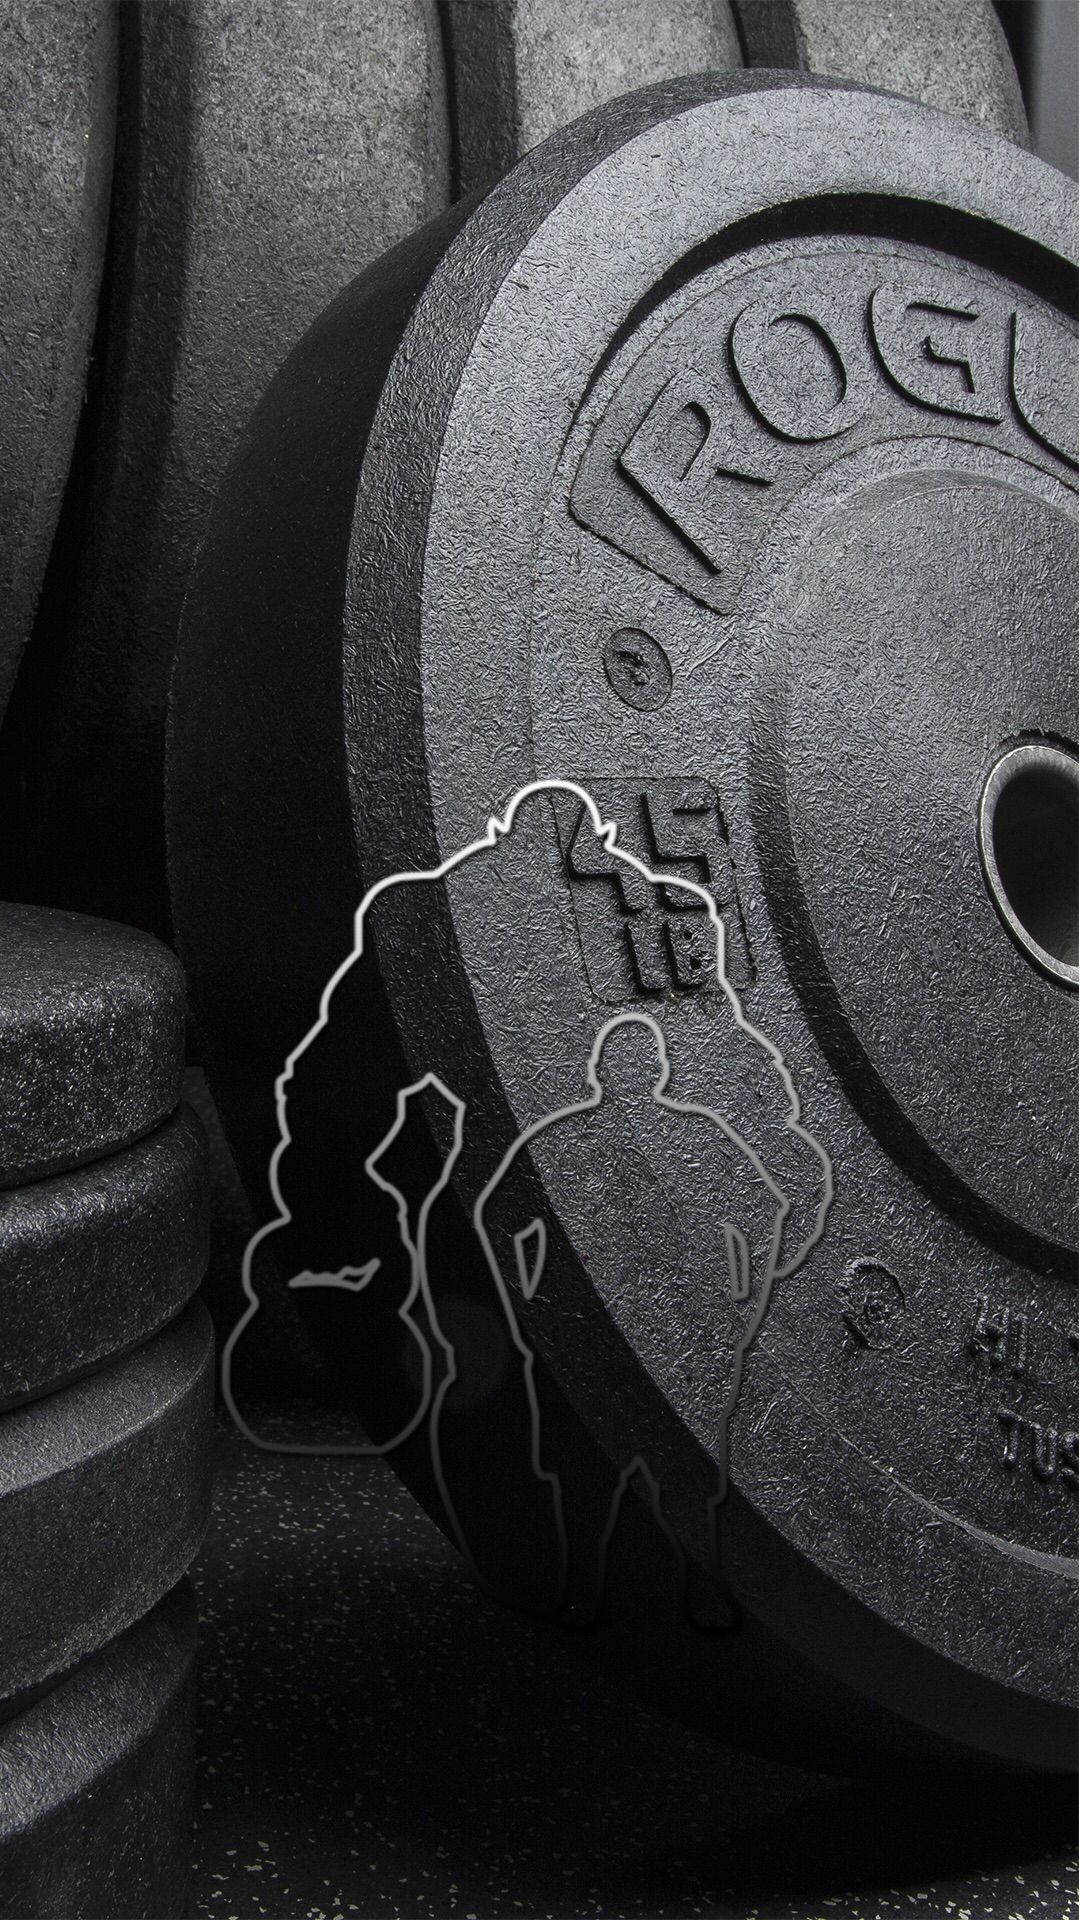 Unique Gym Wallpaper HD for Mobile. Fitness wallpaper, Gym motivation wallpaper, Fitness wallpaper iphone